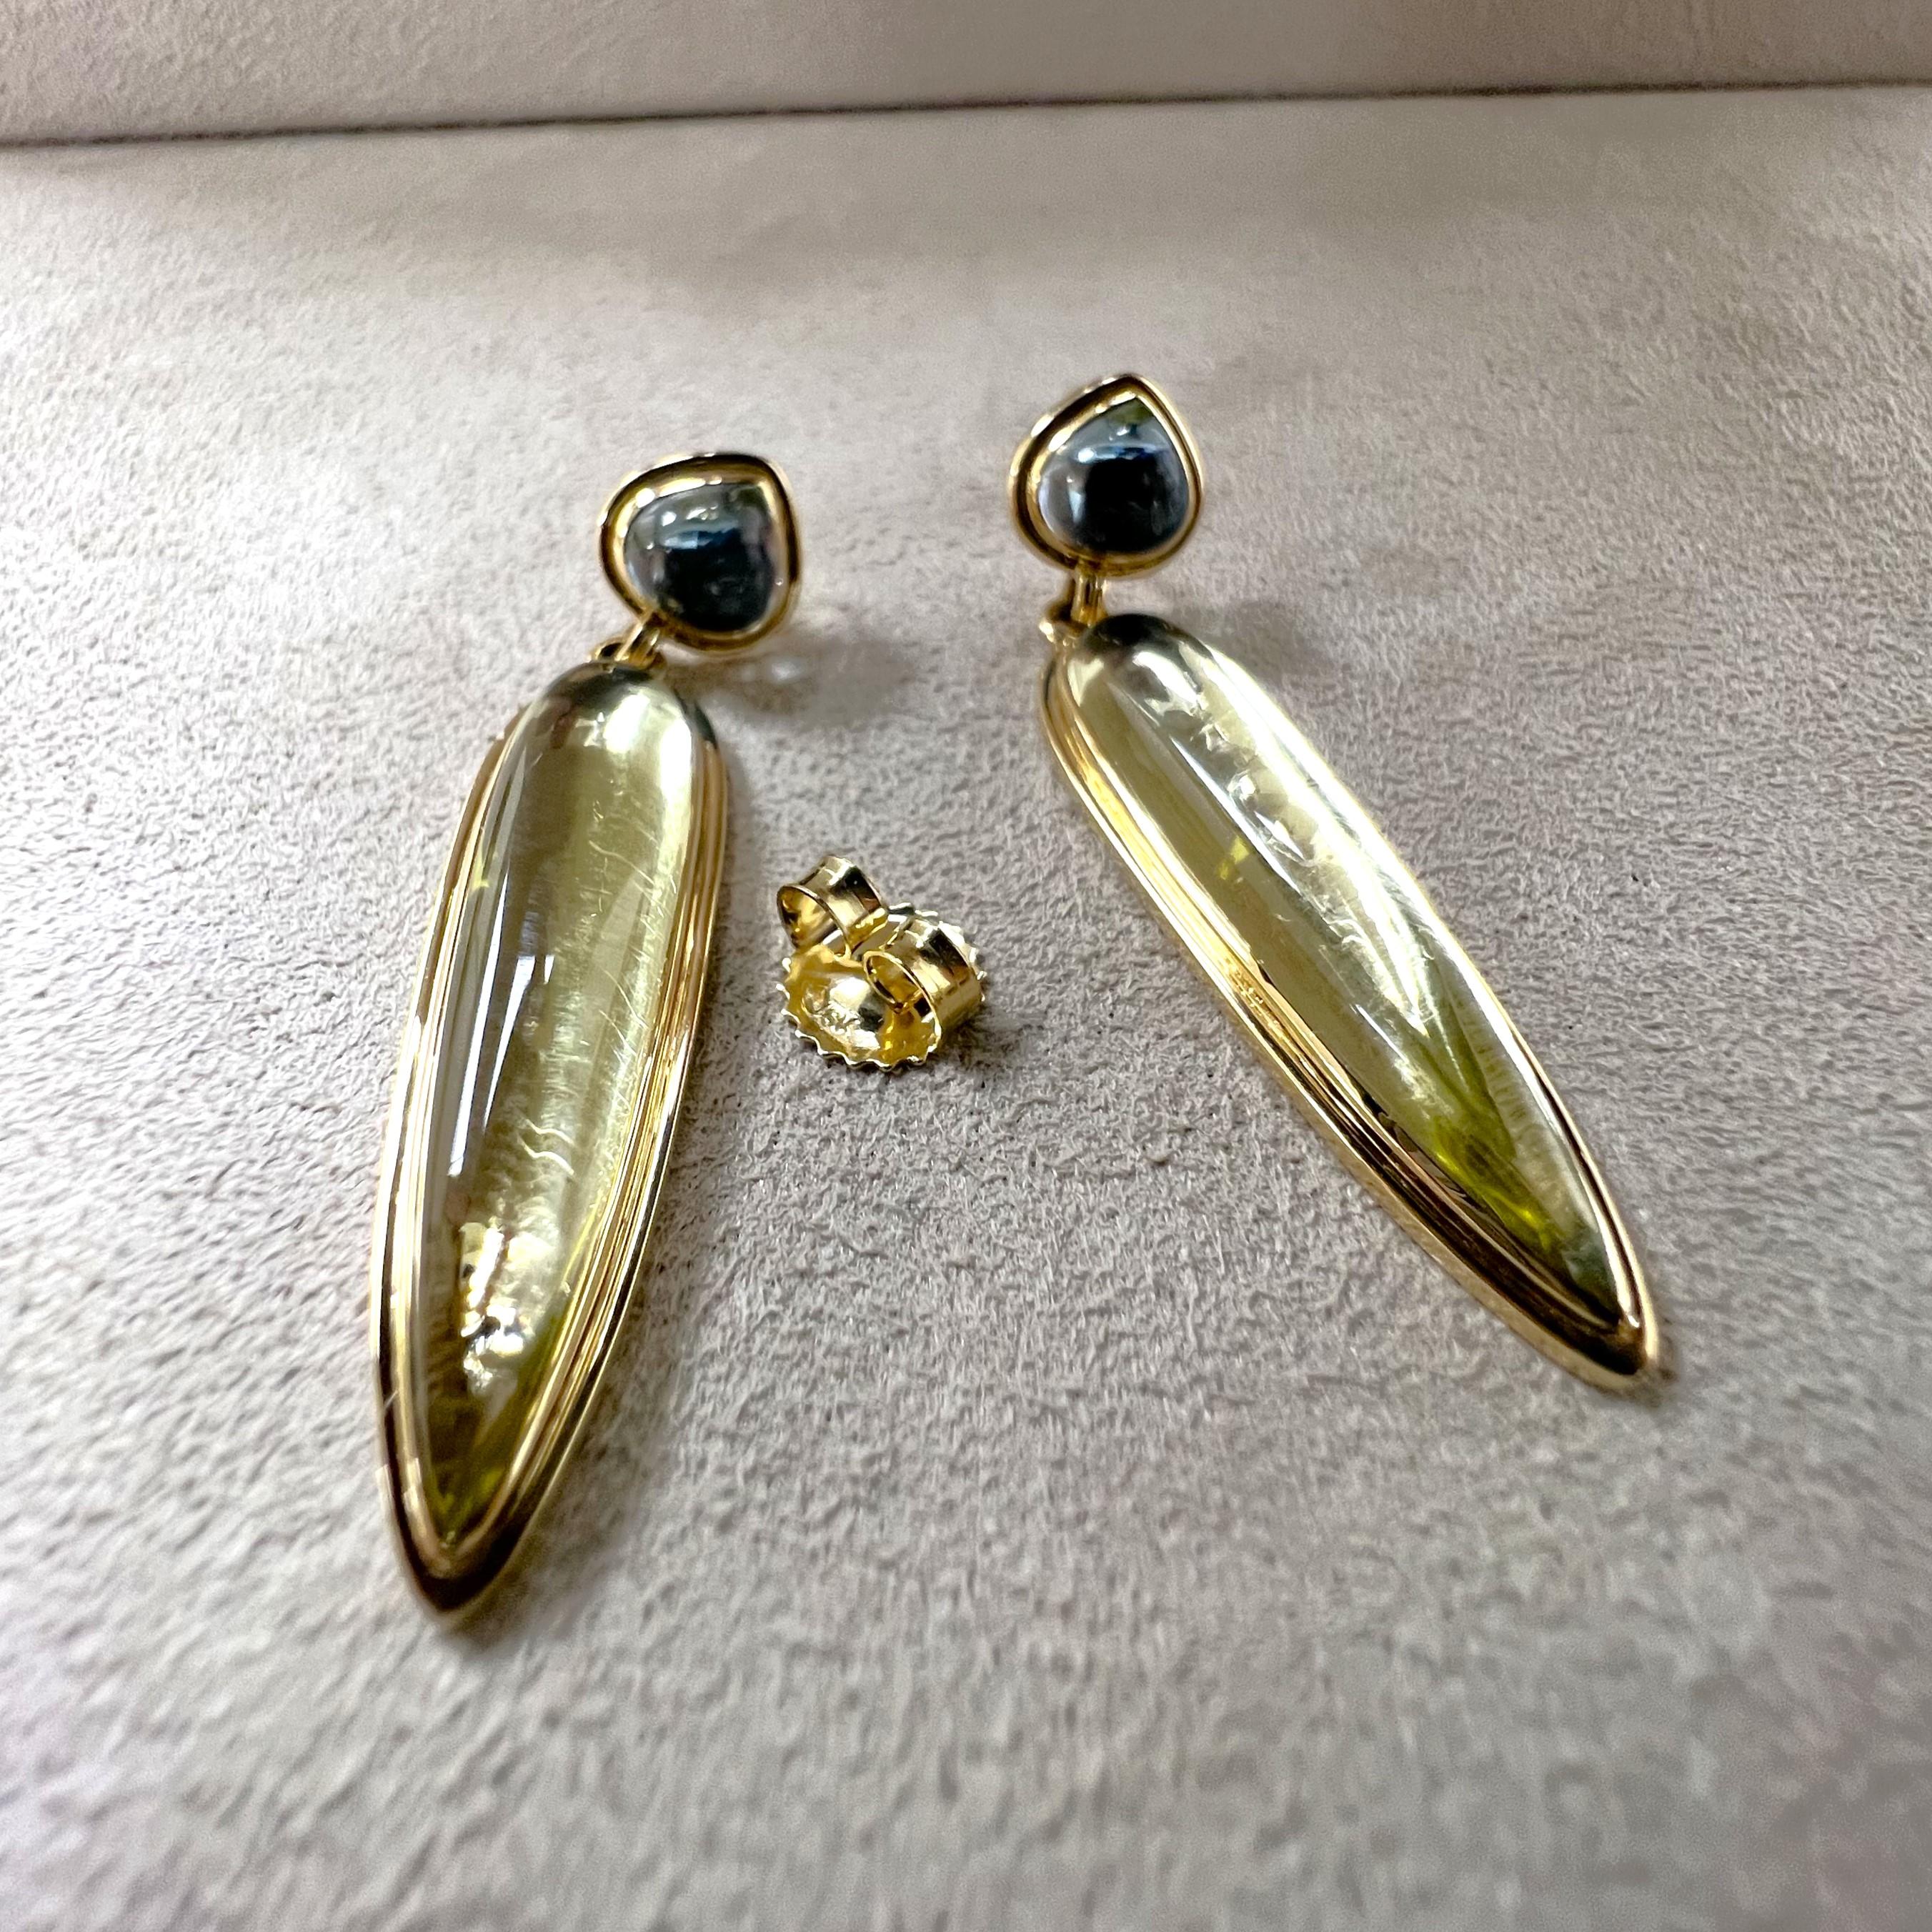 Contemporary Syna Yellow Gold Earrings with Blue Topaz and Lemon Quartz